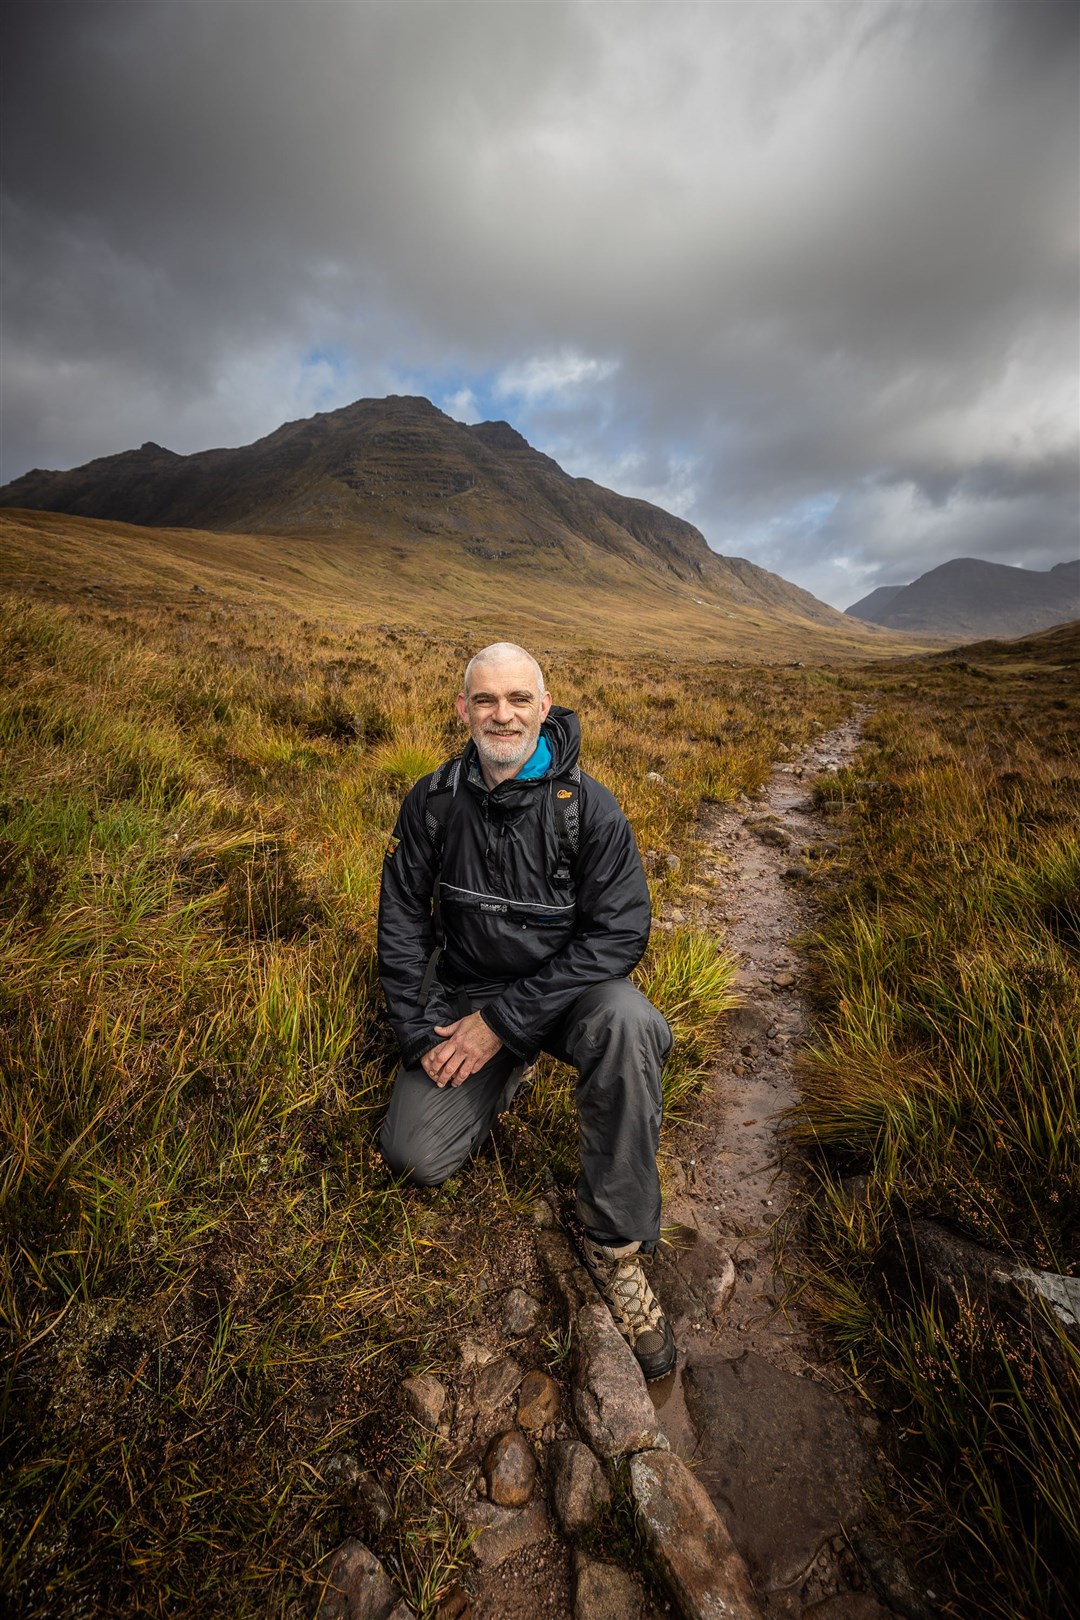 Bob Brown, Upland Path Manager with NTS on the site of the Torridon path.